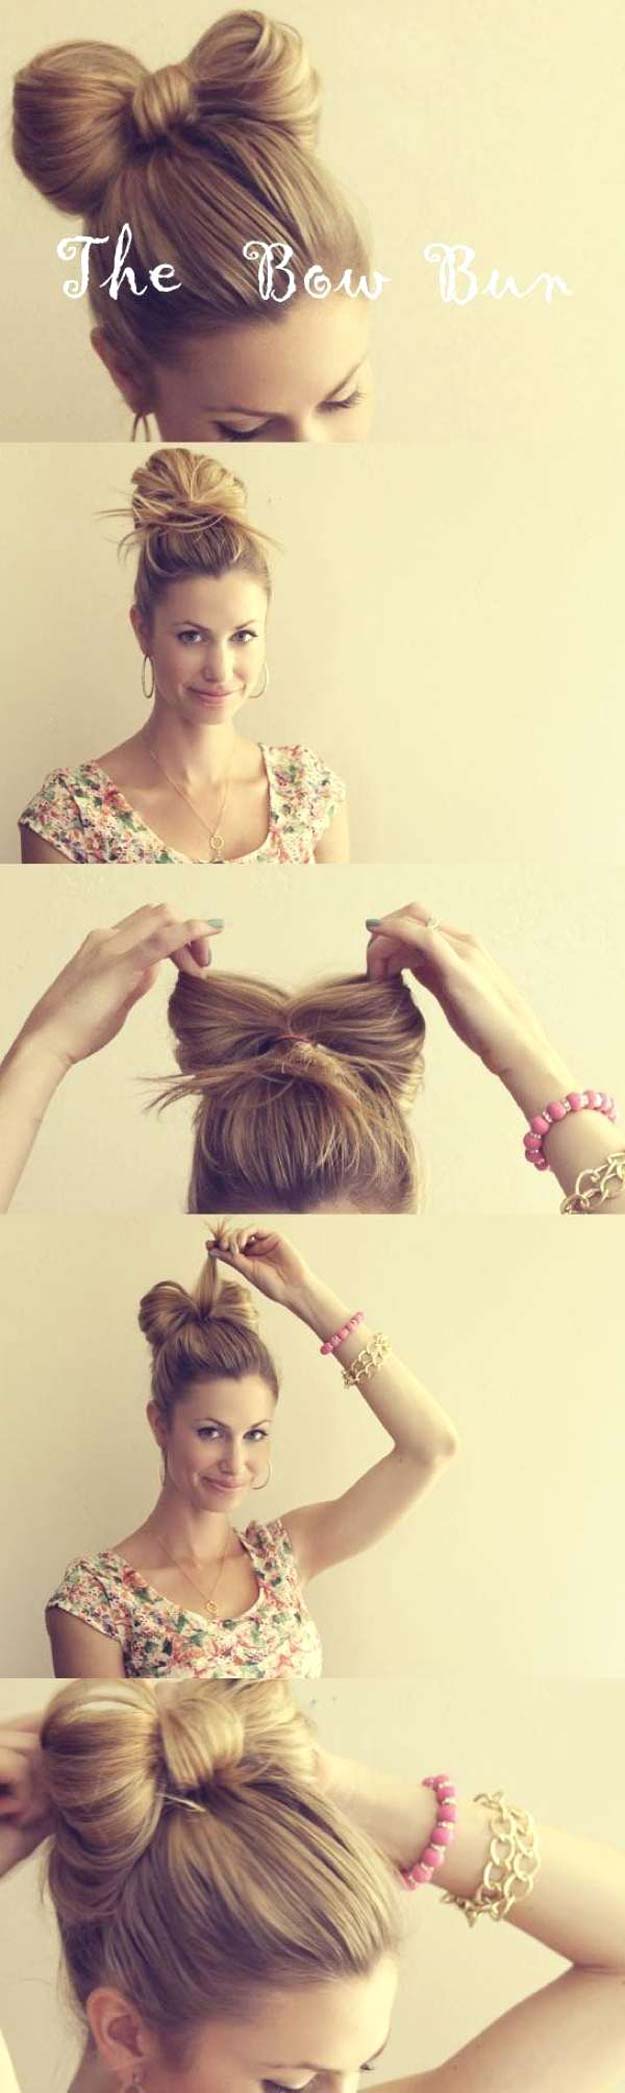 Cool and Easy DIY Hairstyles - The Hair Bow - Quick and Easy Ideas for Back to School Styles for Medium, Short and Long Hair - Fun Tips and Best Step by Step Tutorials for Teens, Prom, Weddings, Special Occasions and Work. Up dos, Braids, Top Knots and Buns, Super Summer Looks http://diyprojectsforteens.com/diy-cool-easy-hairstyles